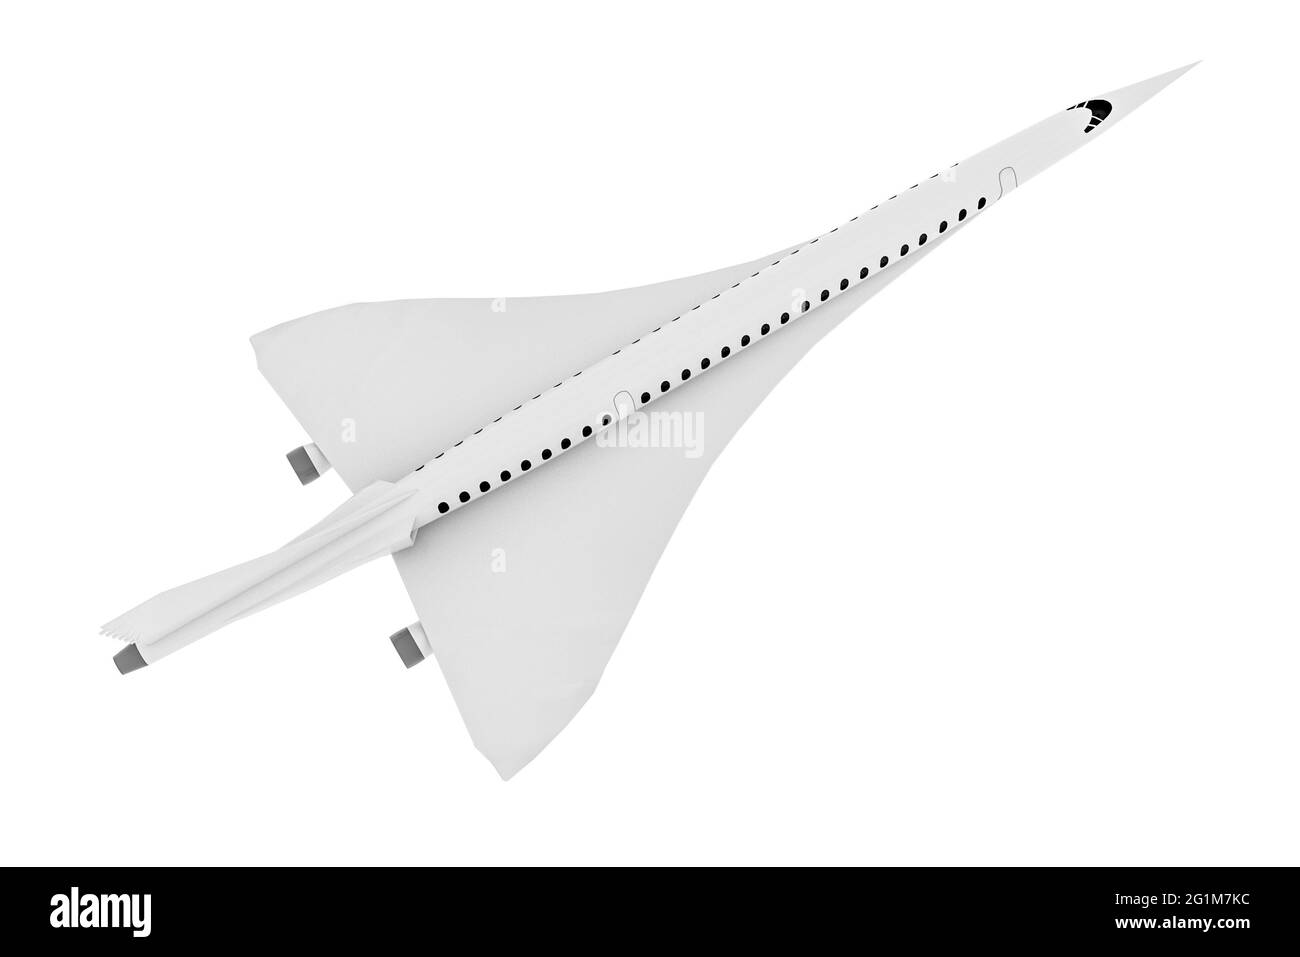 Supersonic flight, the plane to travel faster than ever. Unlike other commercial flights, it has double the speed. 3d render Stock Photo